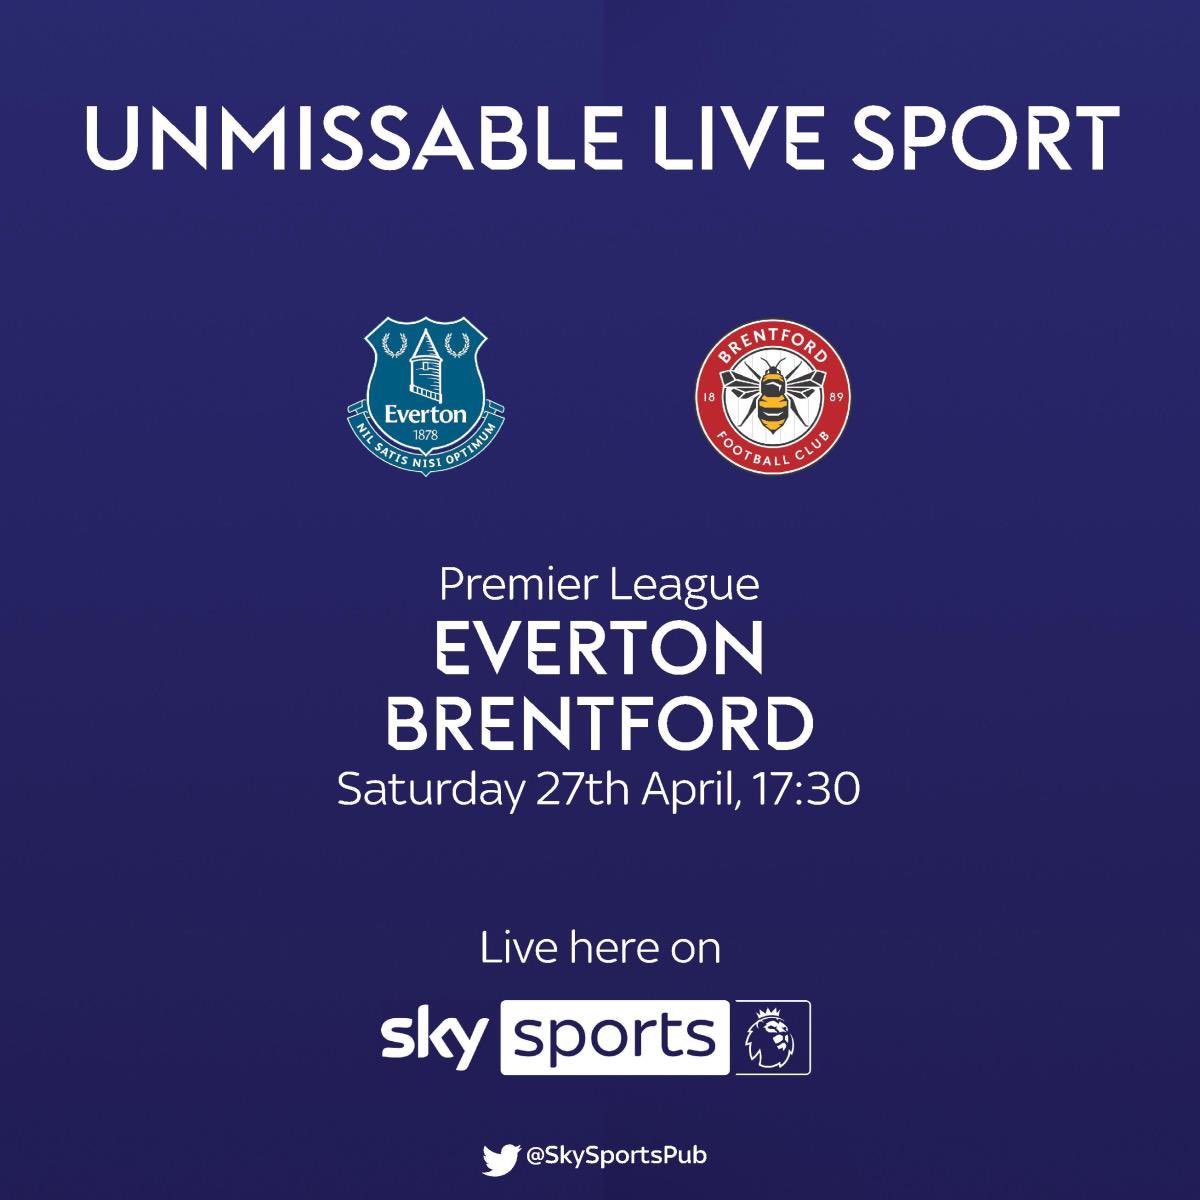 Come & join us for all the action of the Premier League live on our MEGA screens here at Kennys Sports Bar with full commentary 

⚽️ Everton v Brentford 5:30pm

#football #sportsbar #livesport #premierleague